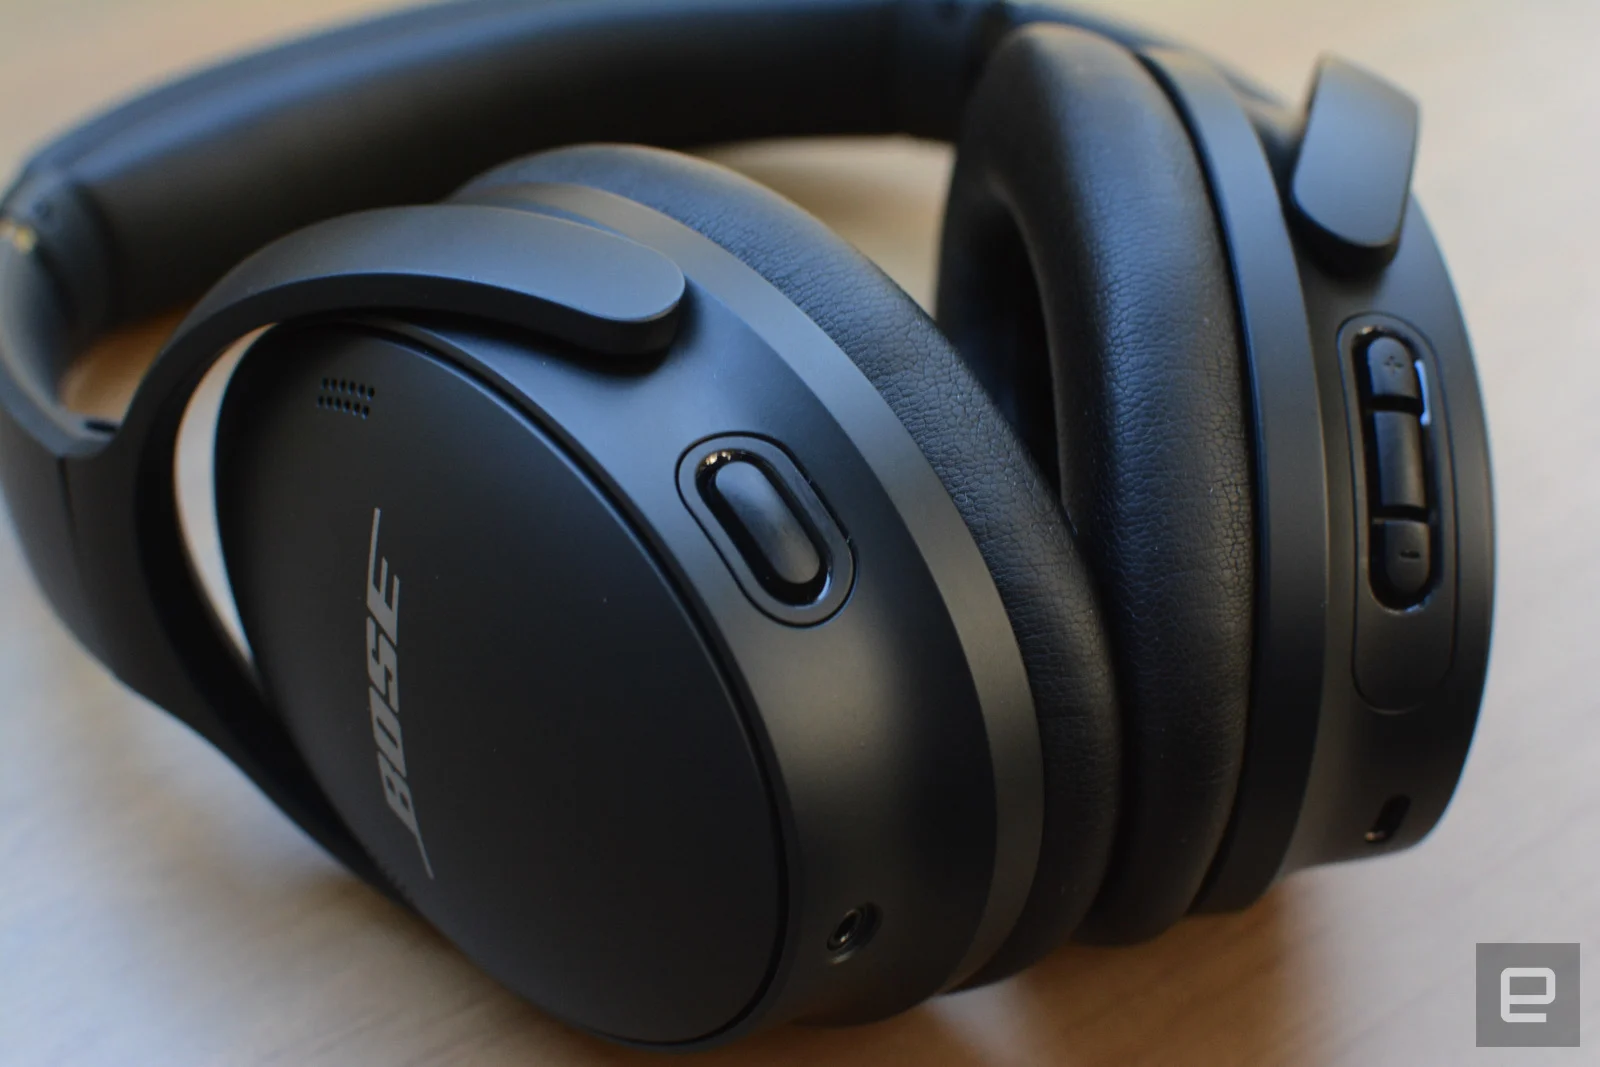 With the latest installment in its popular QuietComfort lineup, Bose revisits some of its best headphones ever. The company introduced minimal changes to its recognizable design, focusing its attention on improving ANC performance and adding an ambient sound mode. Adjustable voice levels make the QC45 a solid option for calls and this new model is $30 cheaper than its predecessor. 